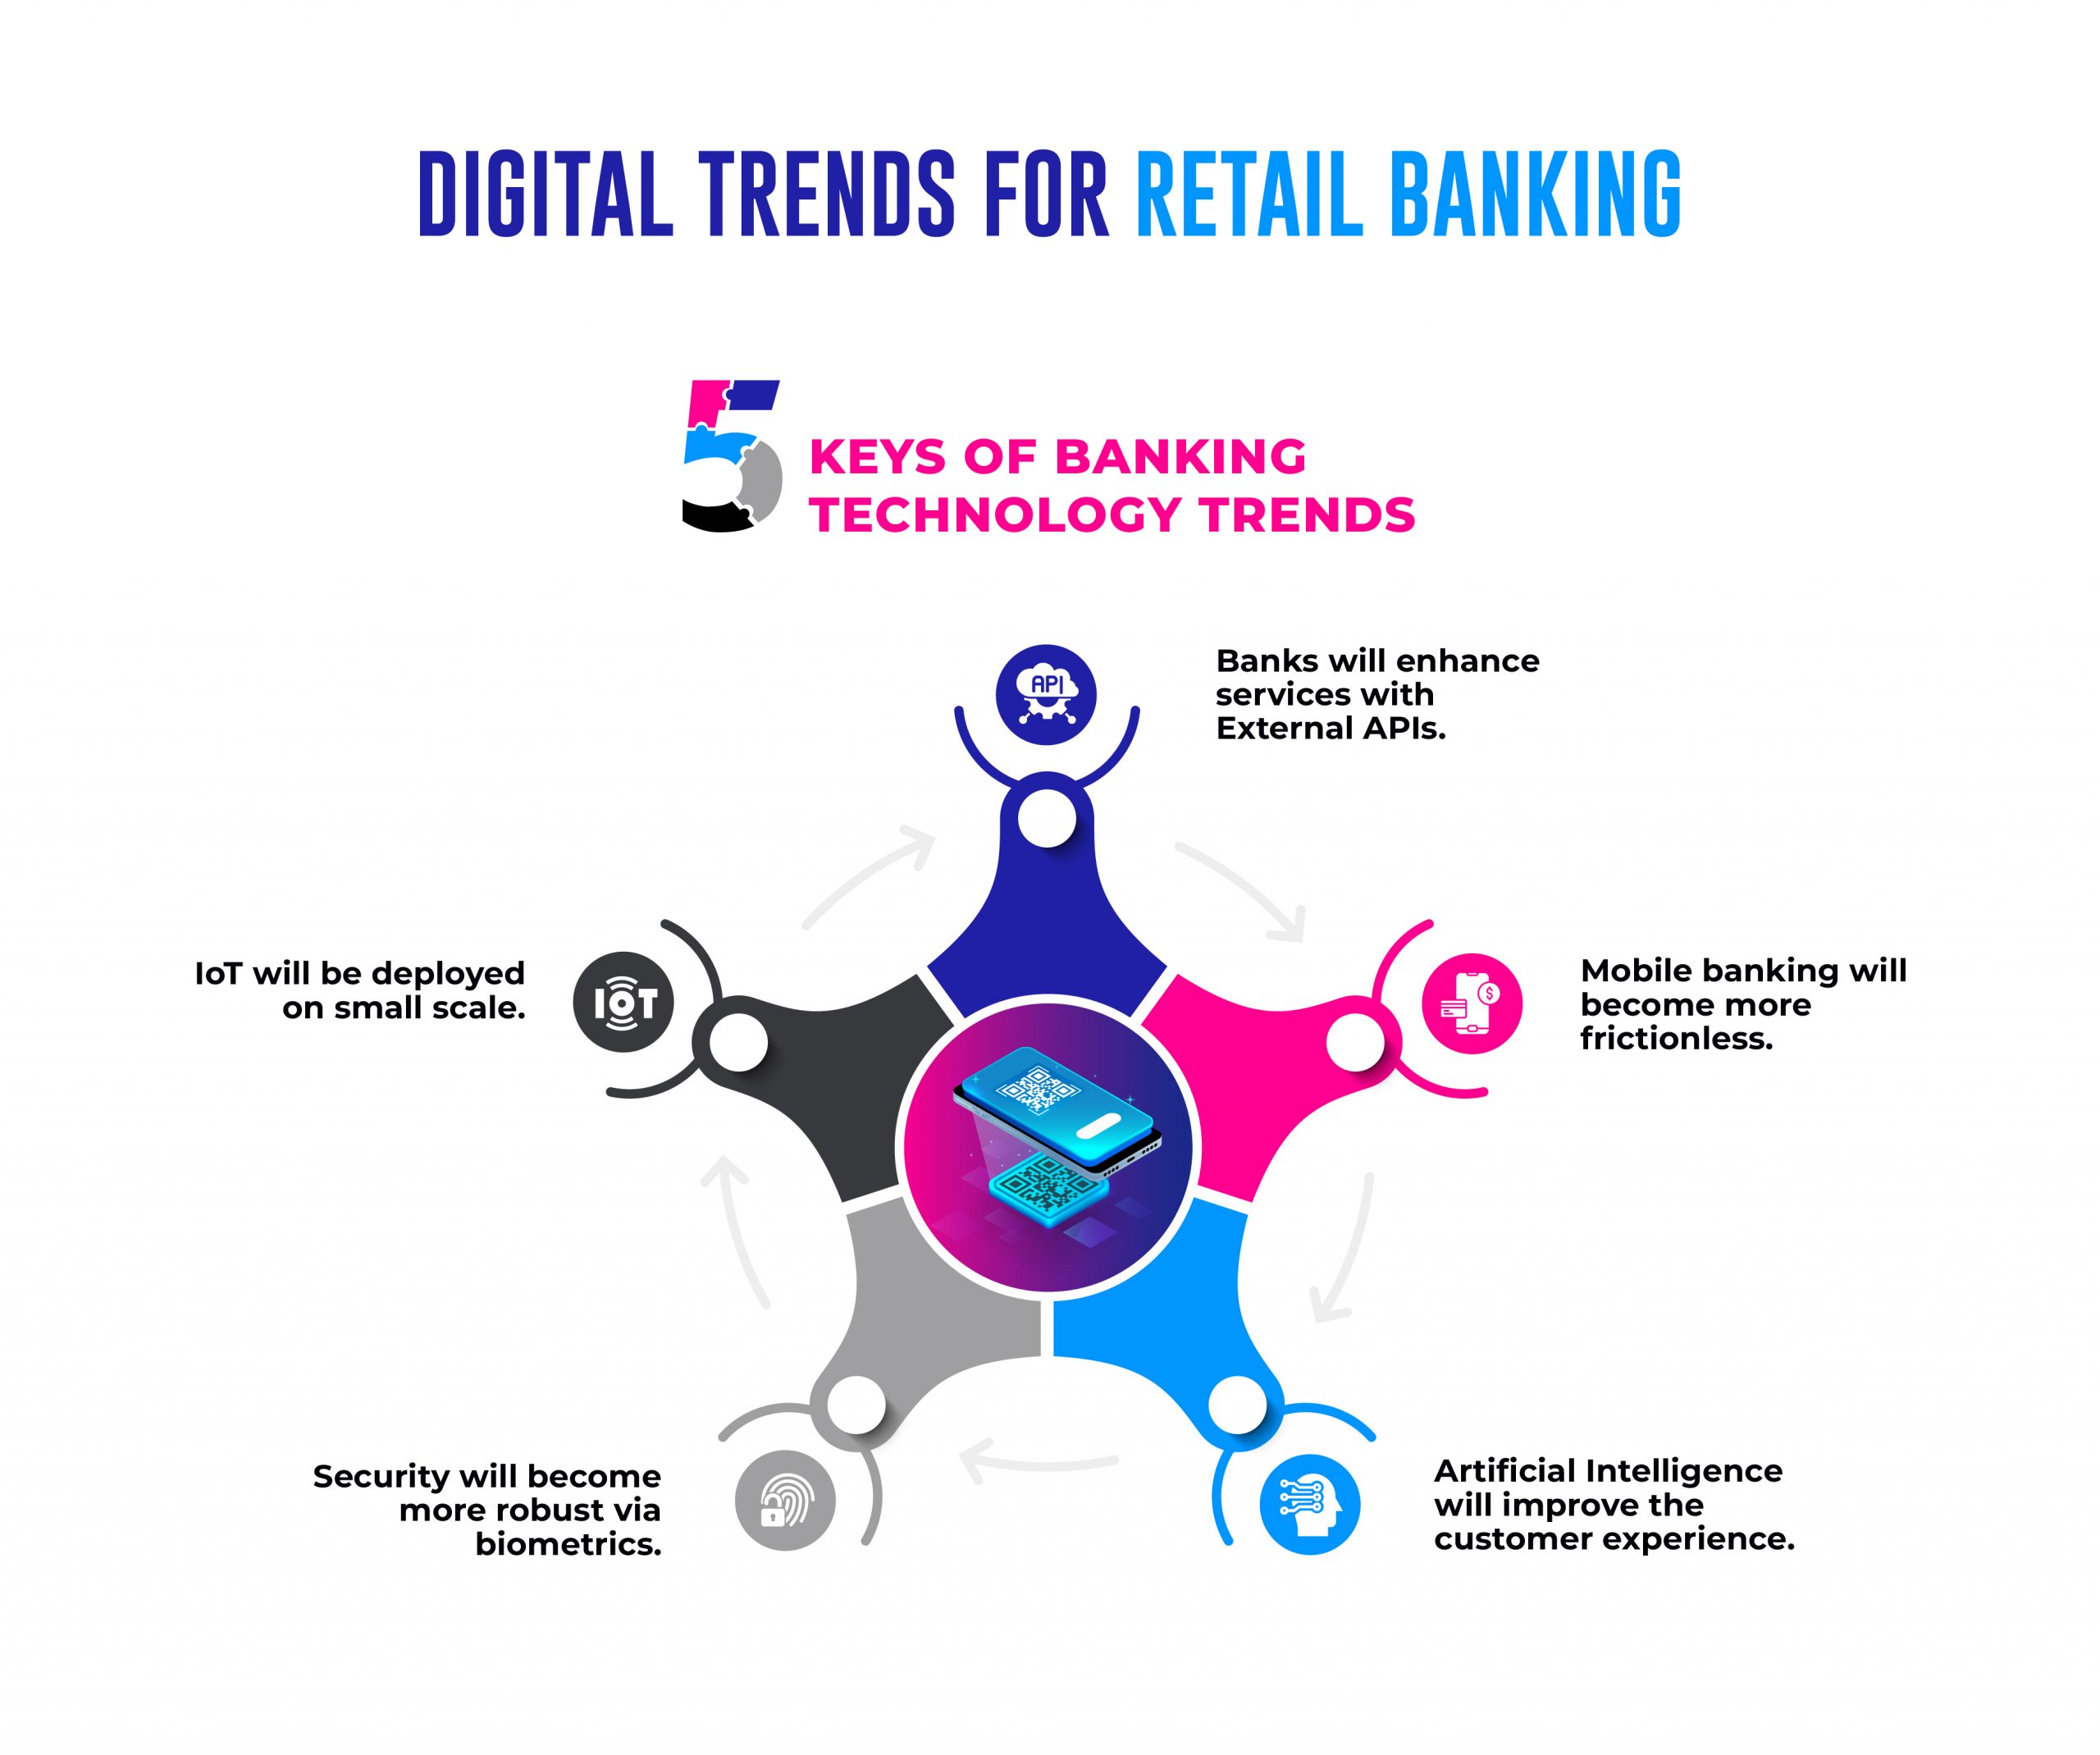 Digital Trends for Retail Banking